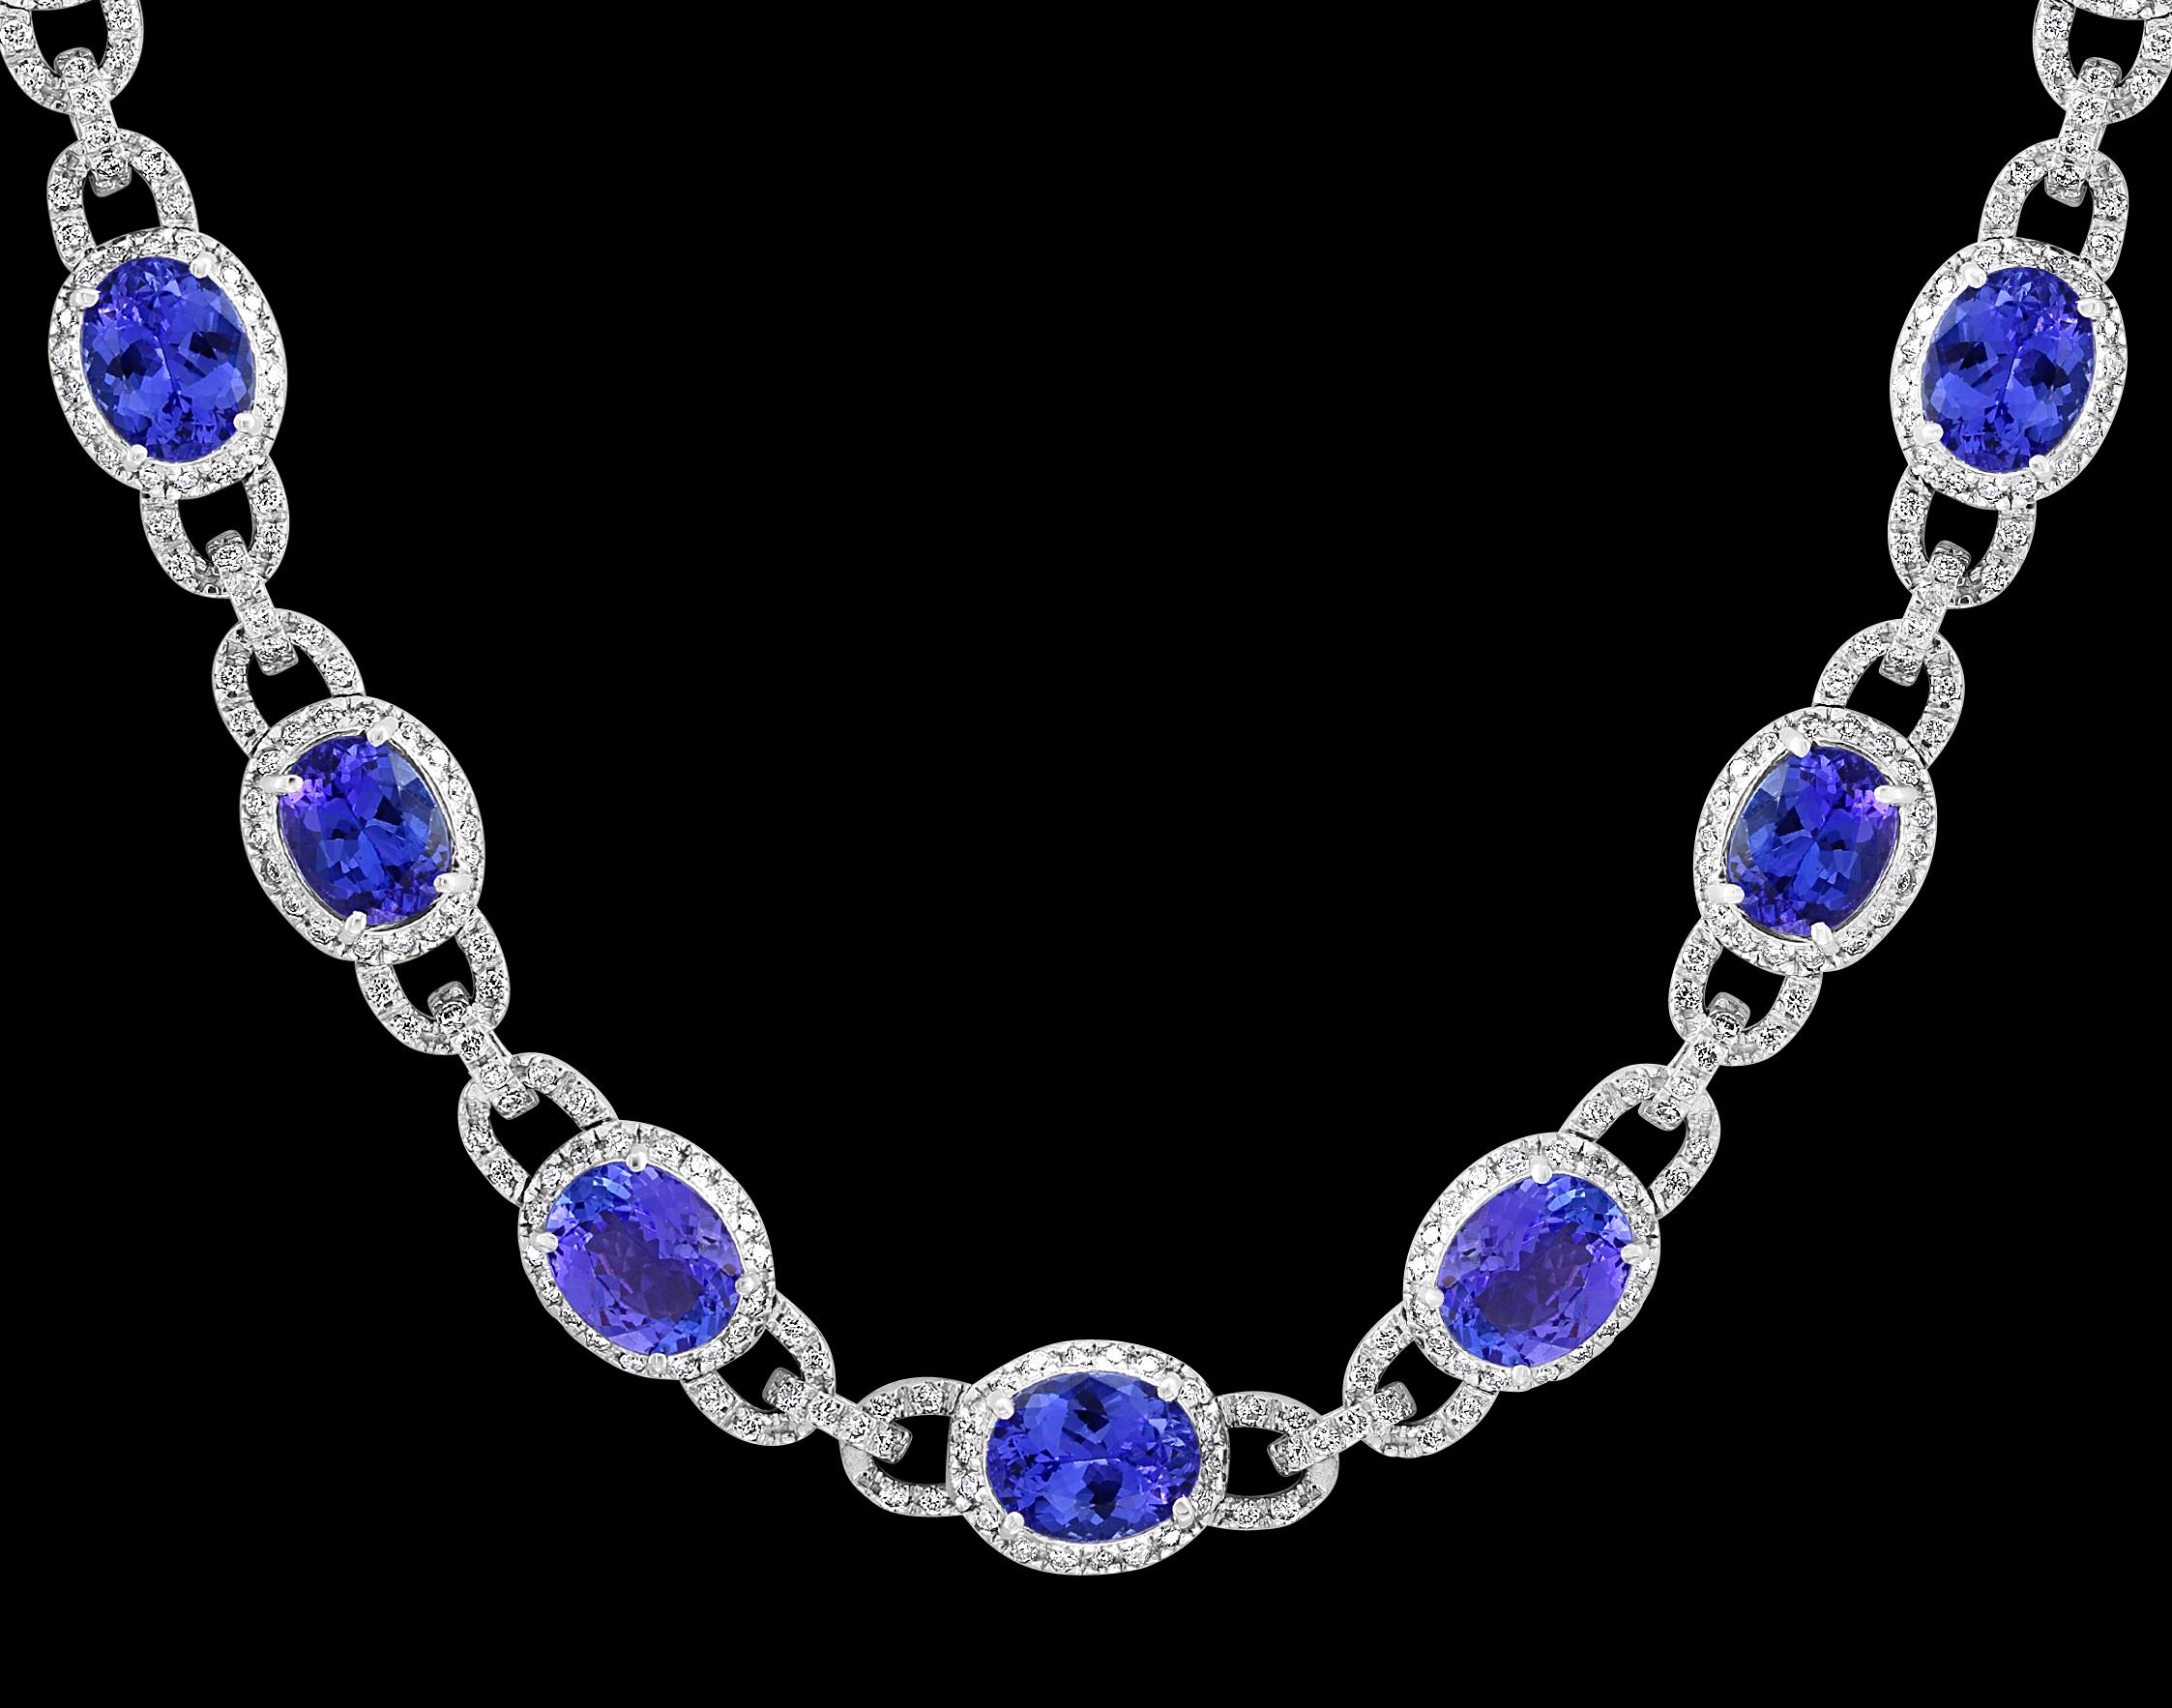 This extraordinary Necklace is consist of 19 Fine oval Tanzanite  weighing approximately 
 47 Carats. There are  total  of  approximately 8.5 carats of shimmering white diamonds, 
The clear, intense hue of this tanzanite is the most coveted of all